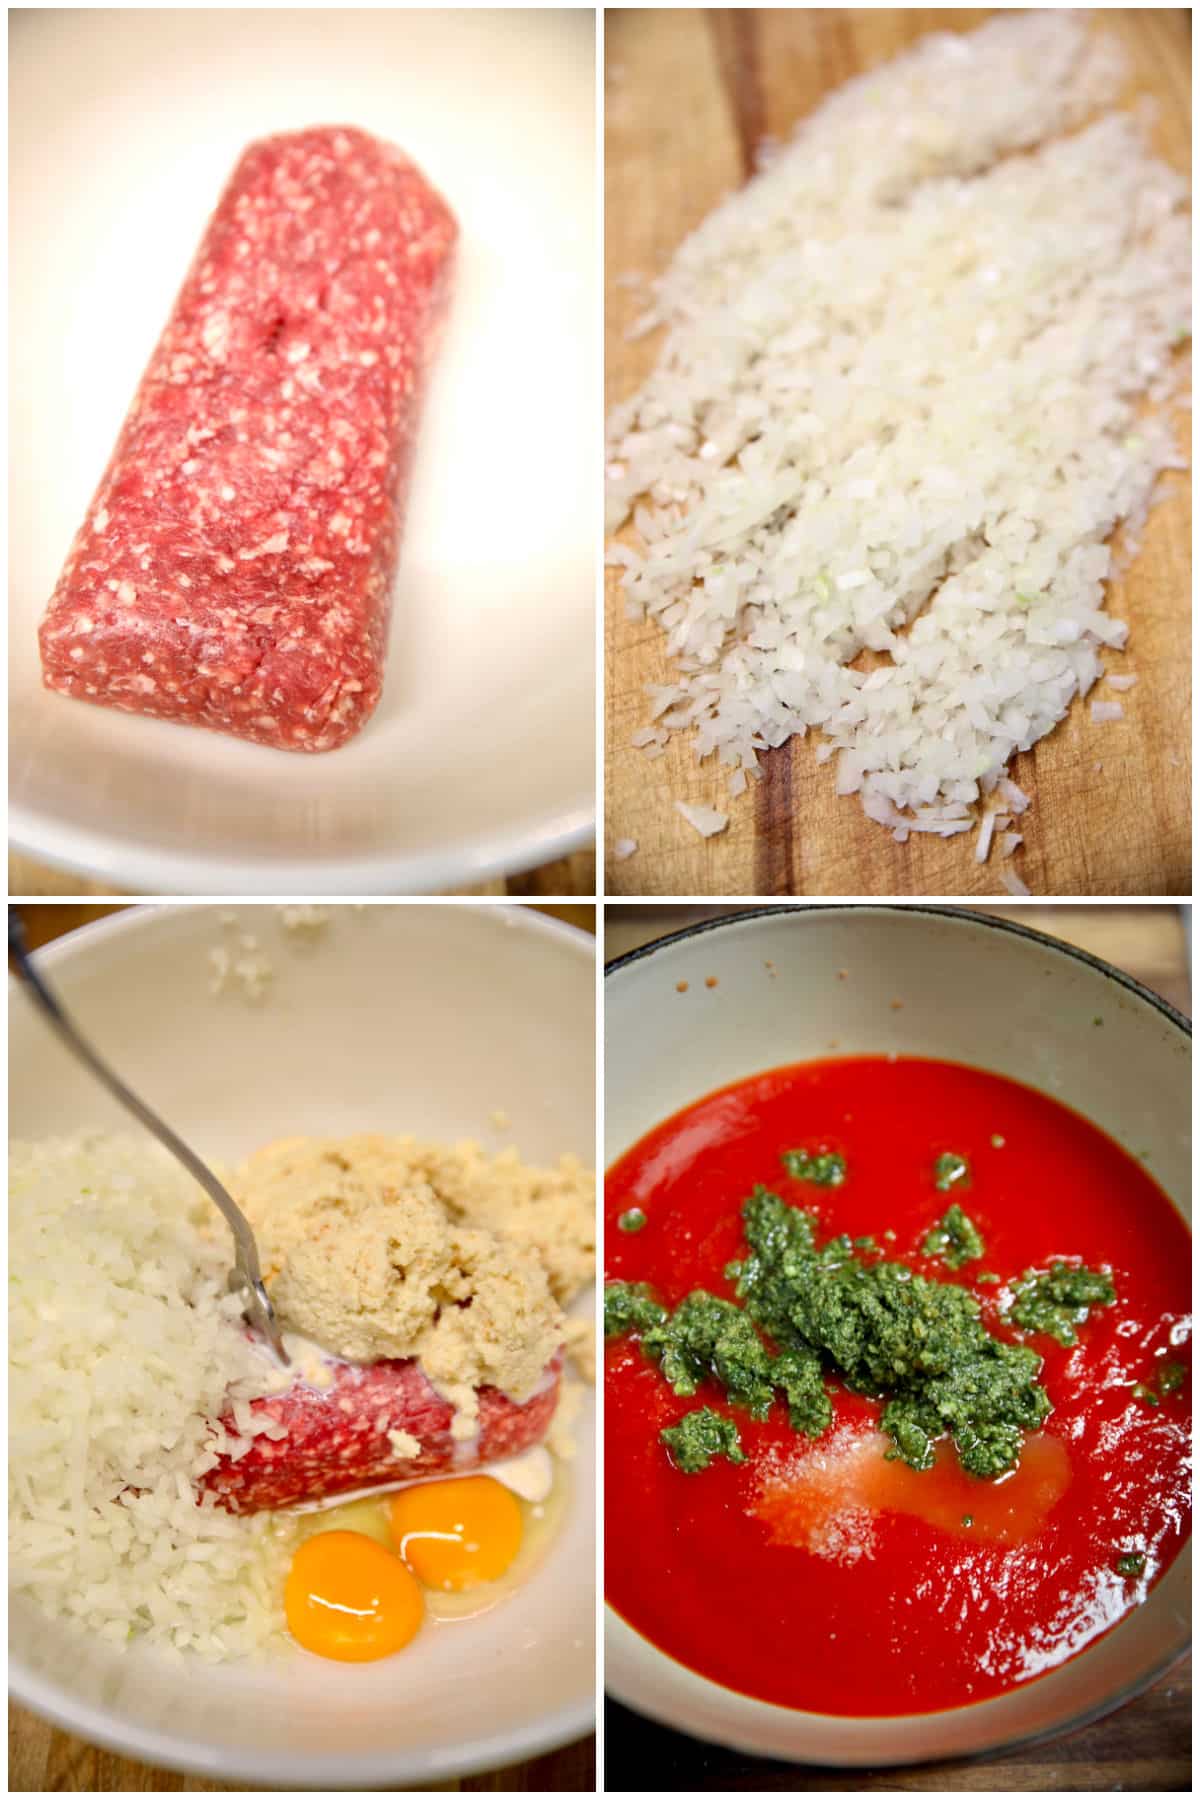 Collage making meatball mixture with ground beef, onions, eggs, bread/ marinara sauce.